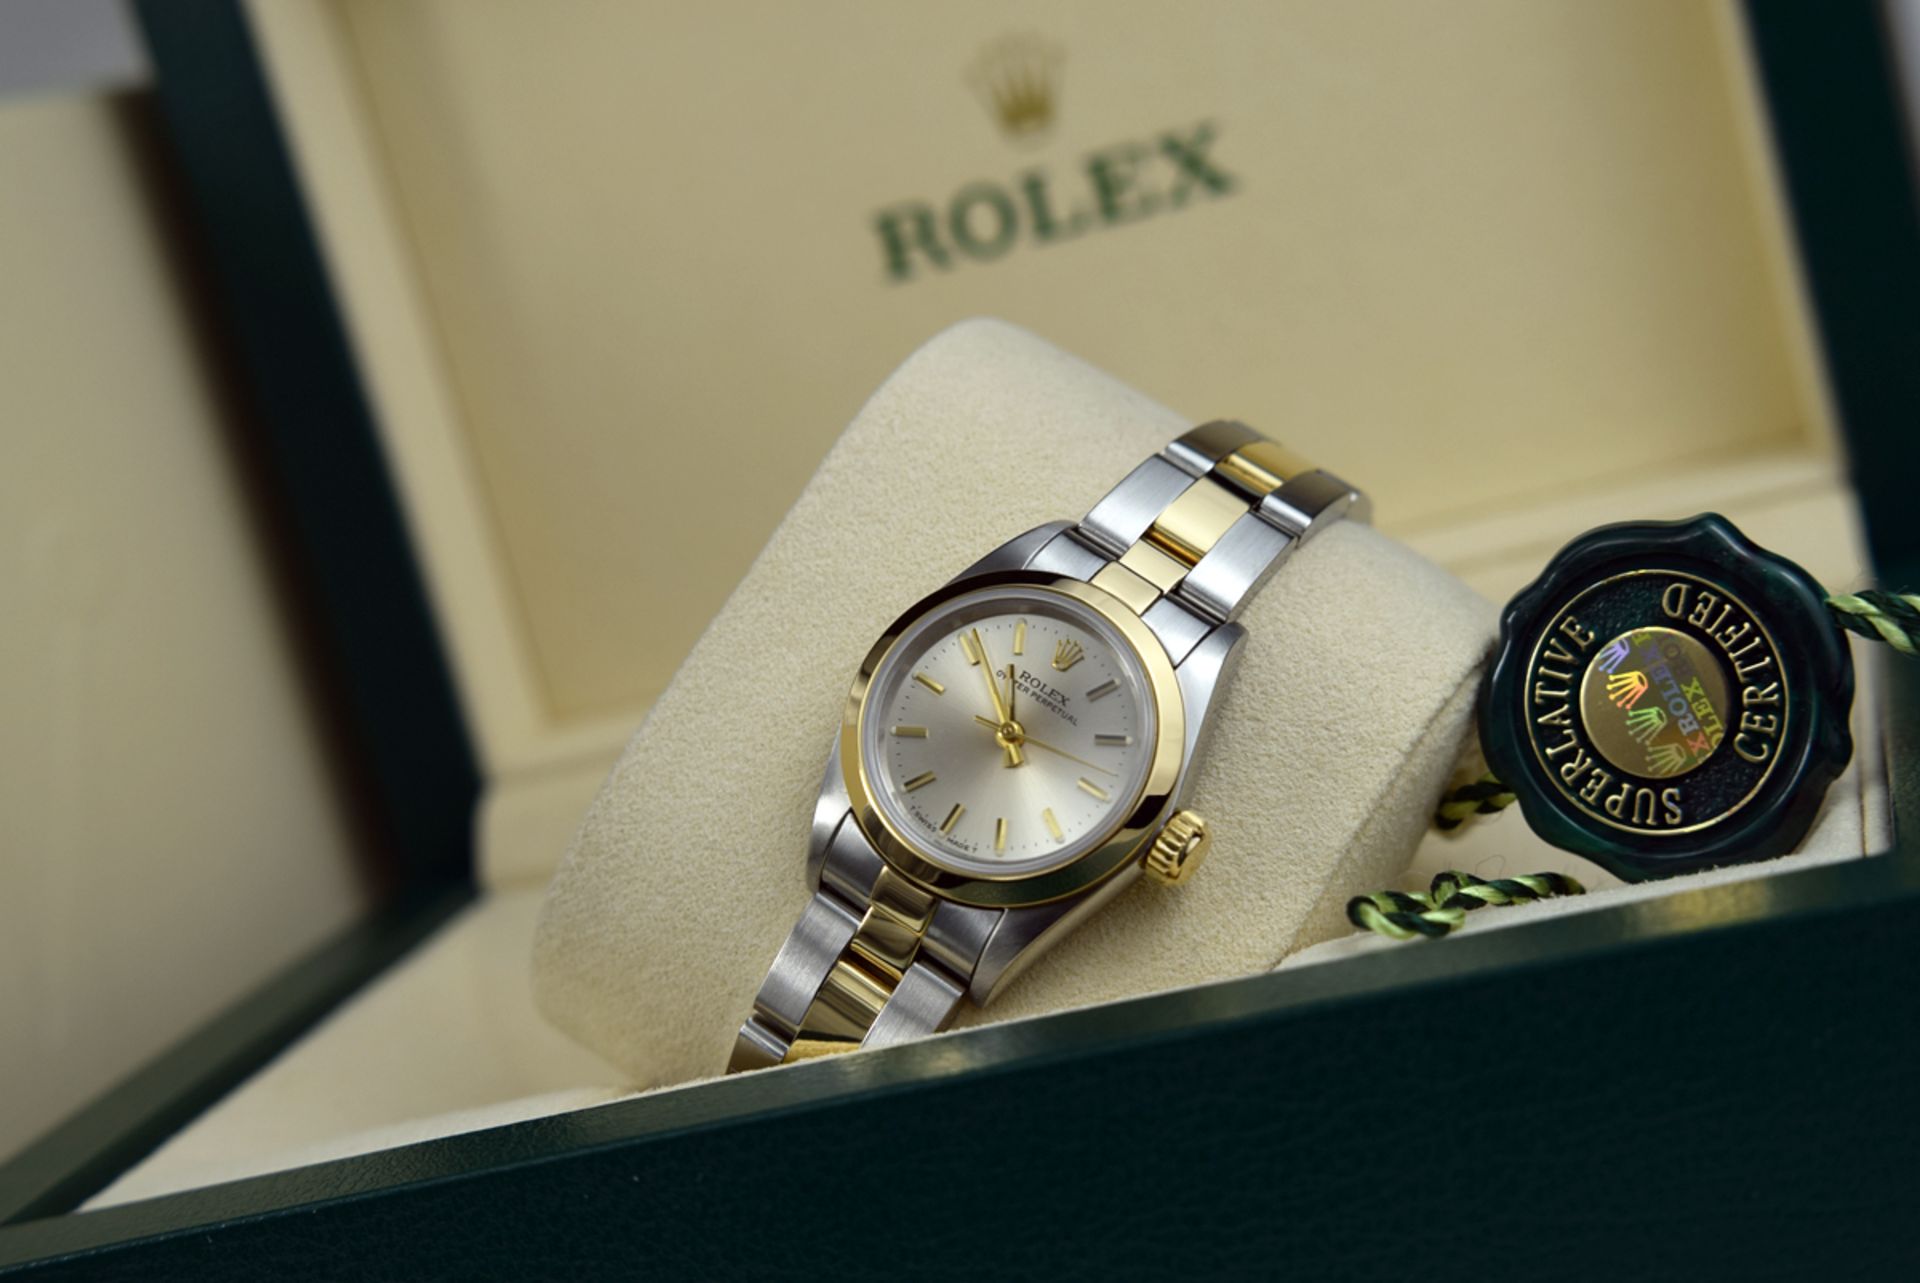 ROLEX Oyster Perpetual - 18k Gold & Steel - Light Champagne Dial - Image 3 of 10